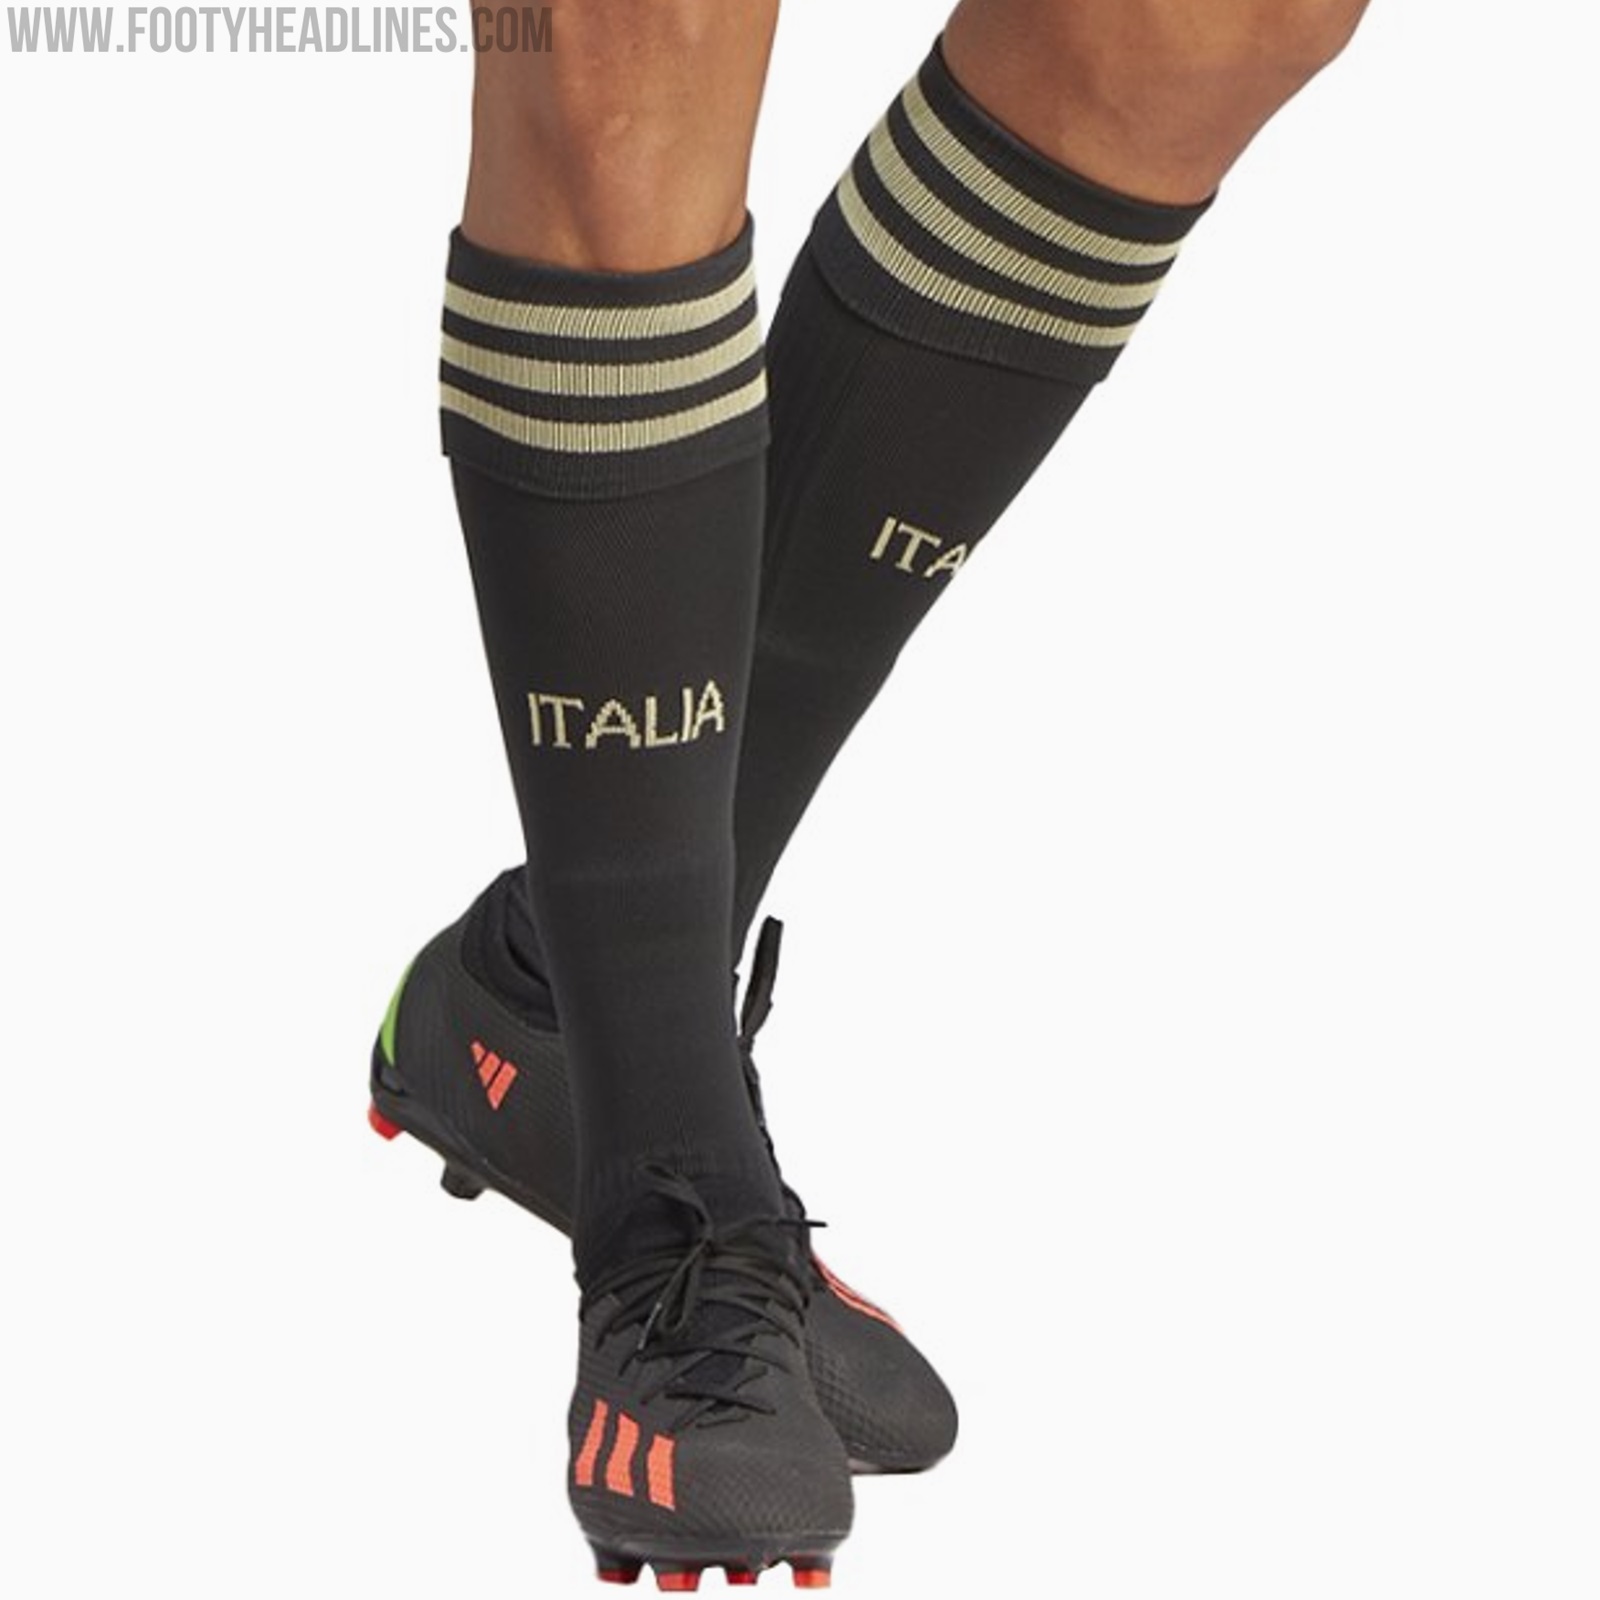 Adidas release 125th anniversary special edition Italy kit